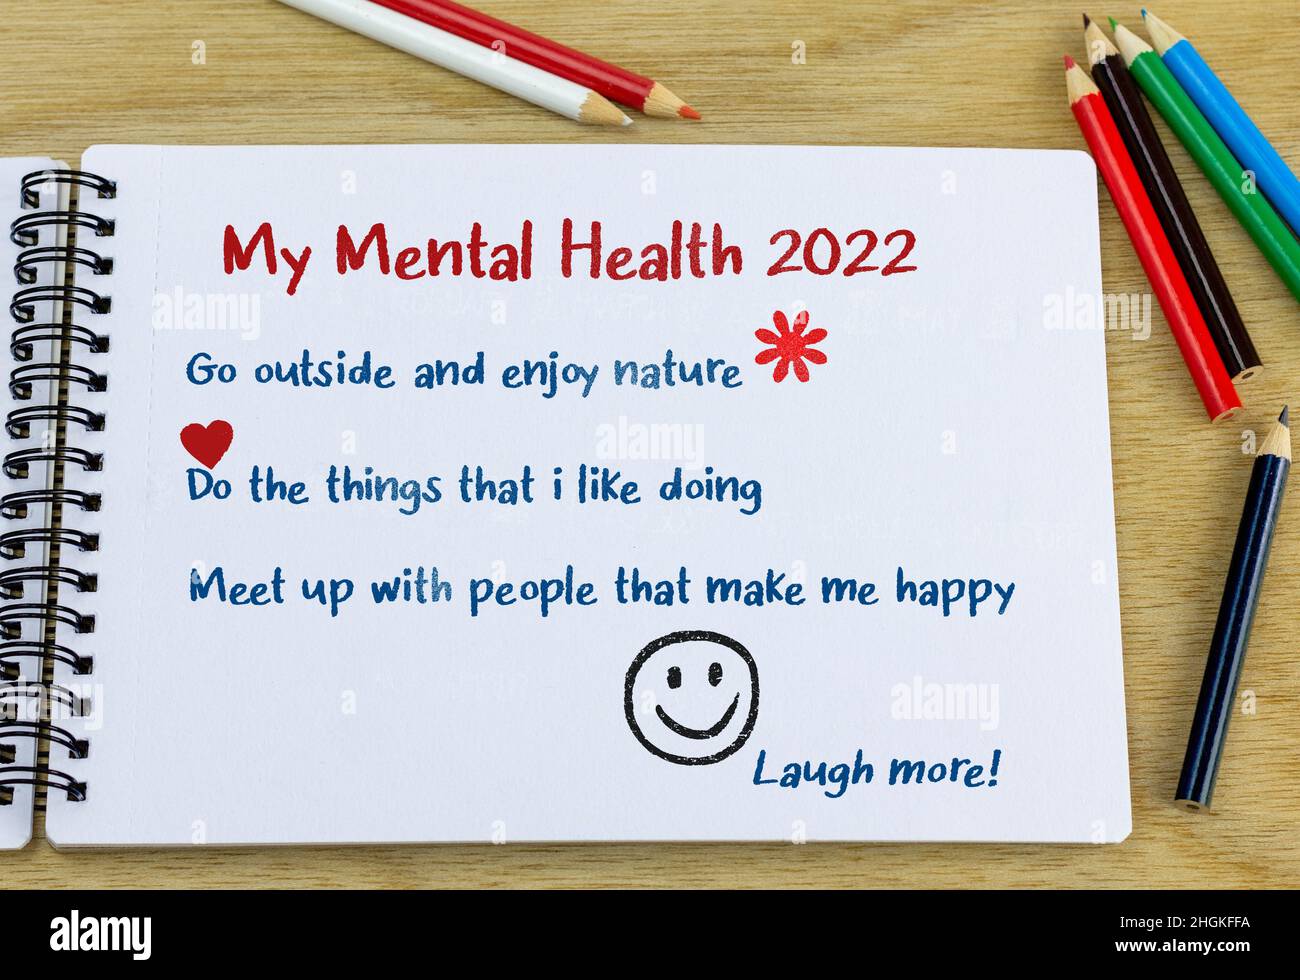 Mental health goals 2022 heading with list of ideas hand written in note book on desk. New year aspirations for wellbeing concept. Stock Photo